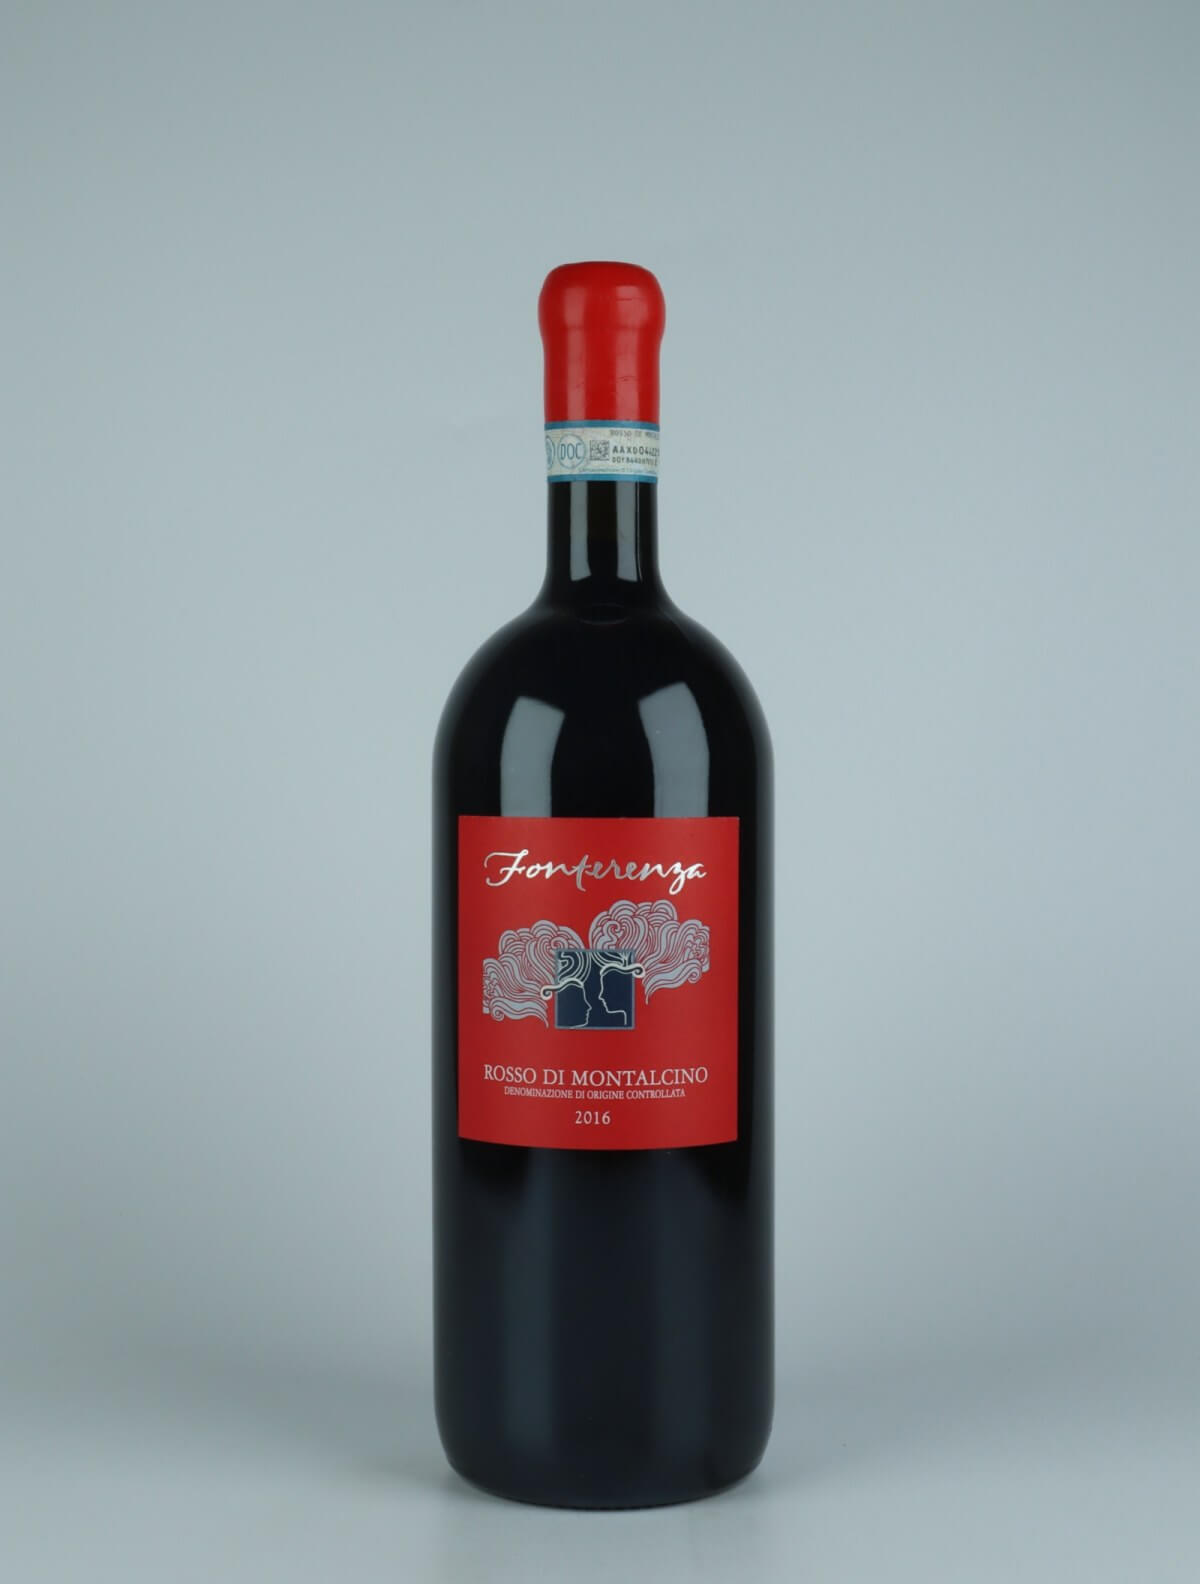 A bottle 2016 Rosso di Montalcino Red wine from Fonterenza, Tuscany in Italy